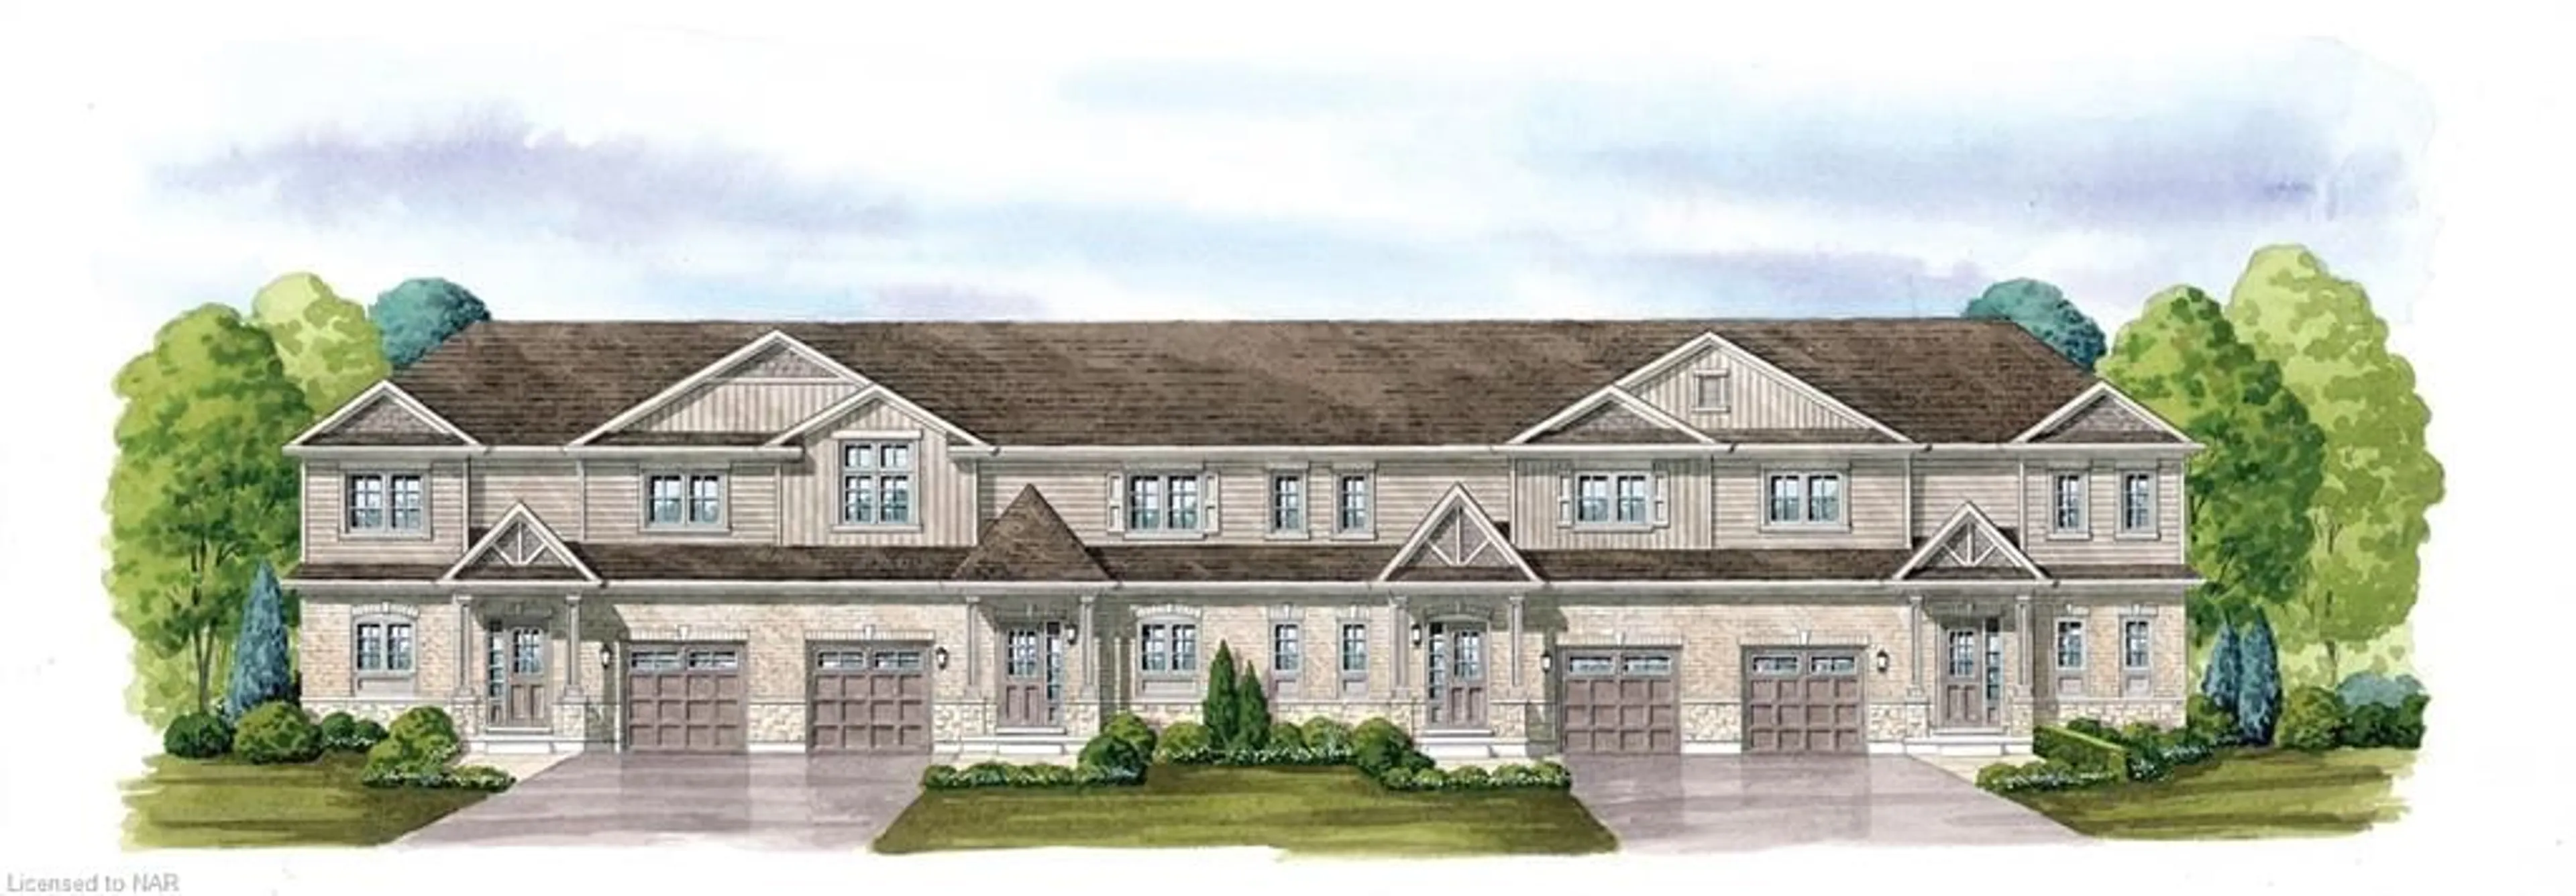 Frontside or backside of a home for LOT 17 Mather Model - Peace Bridge Village Rd, Fort Erie Ontario L2A 000